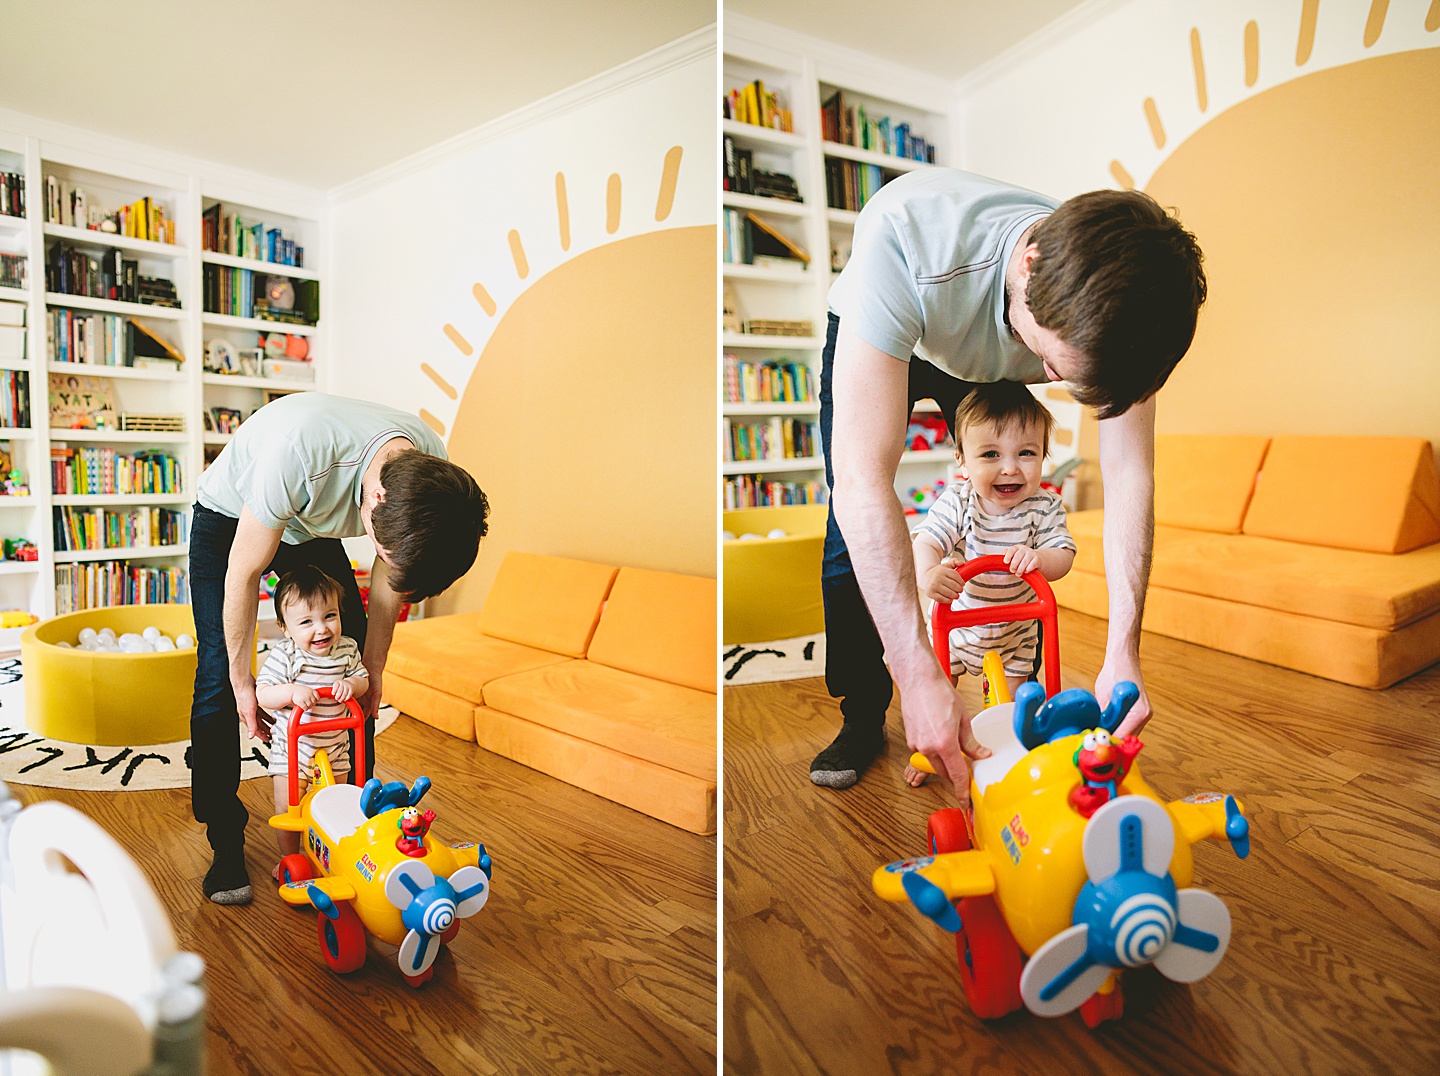 Baby walking using the help of a toy